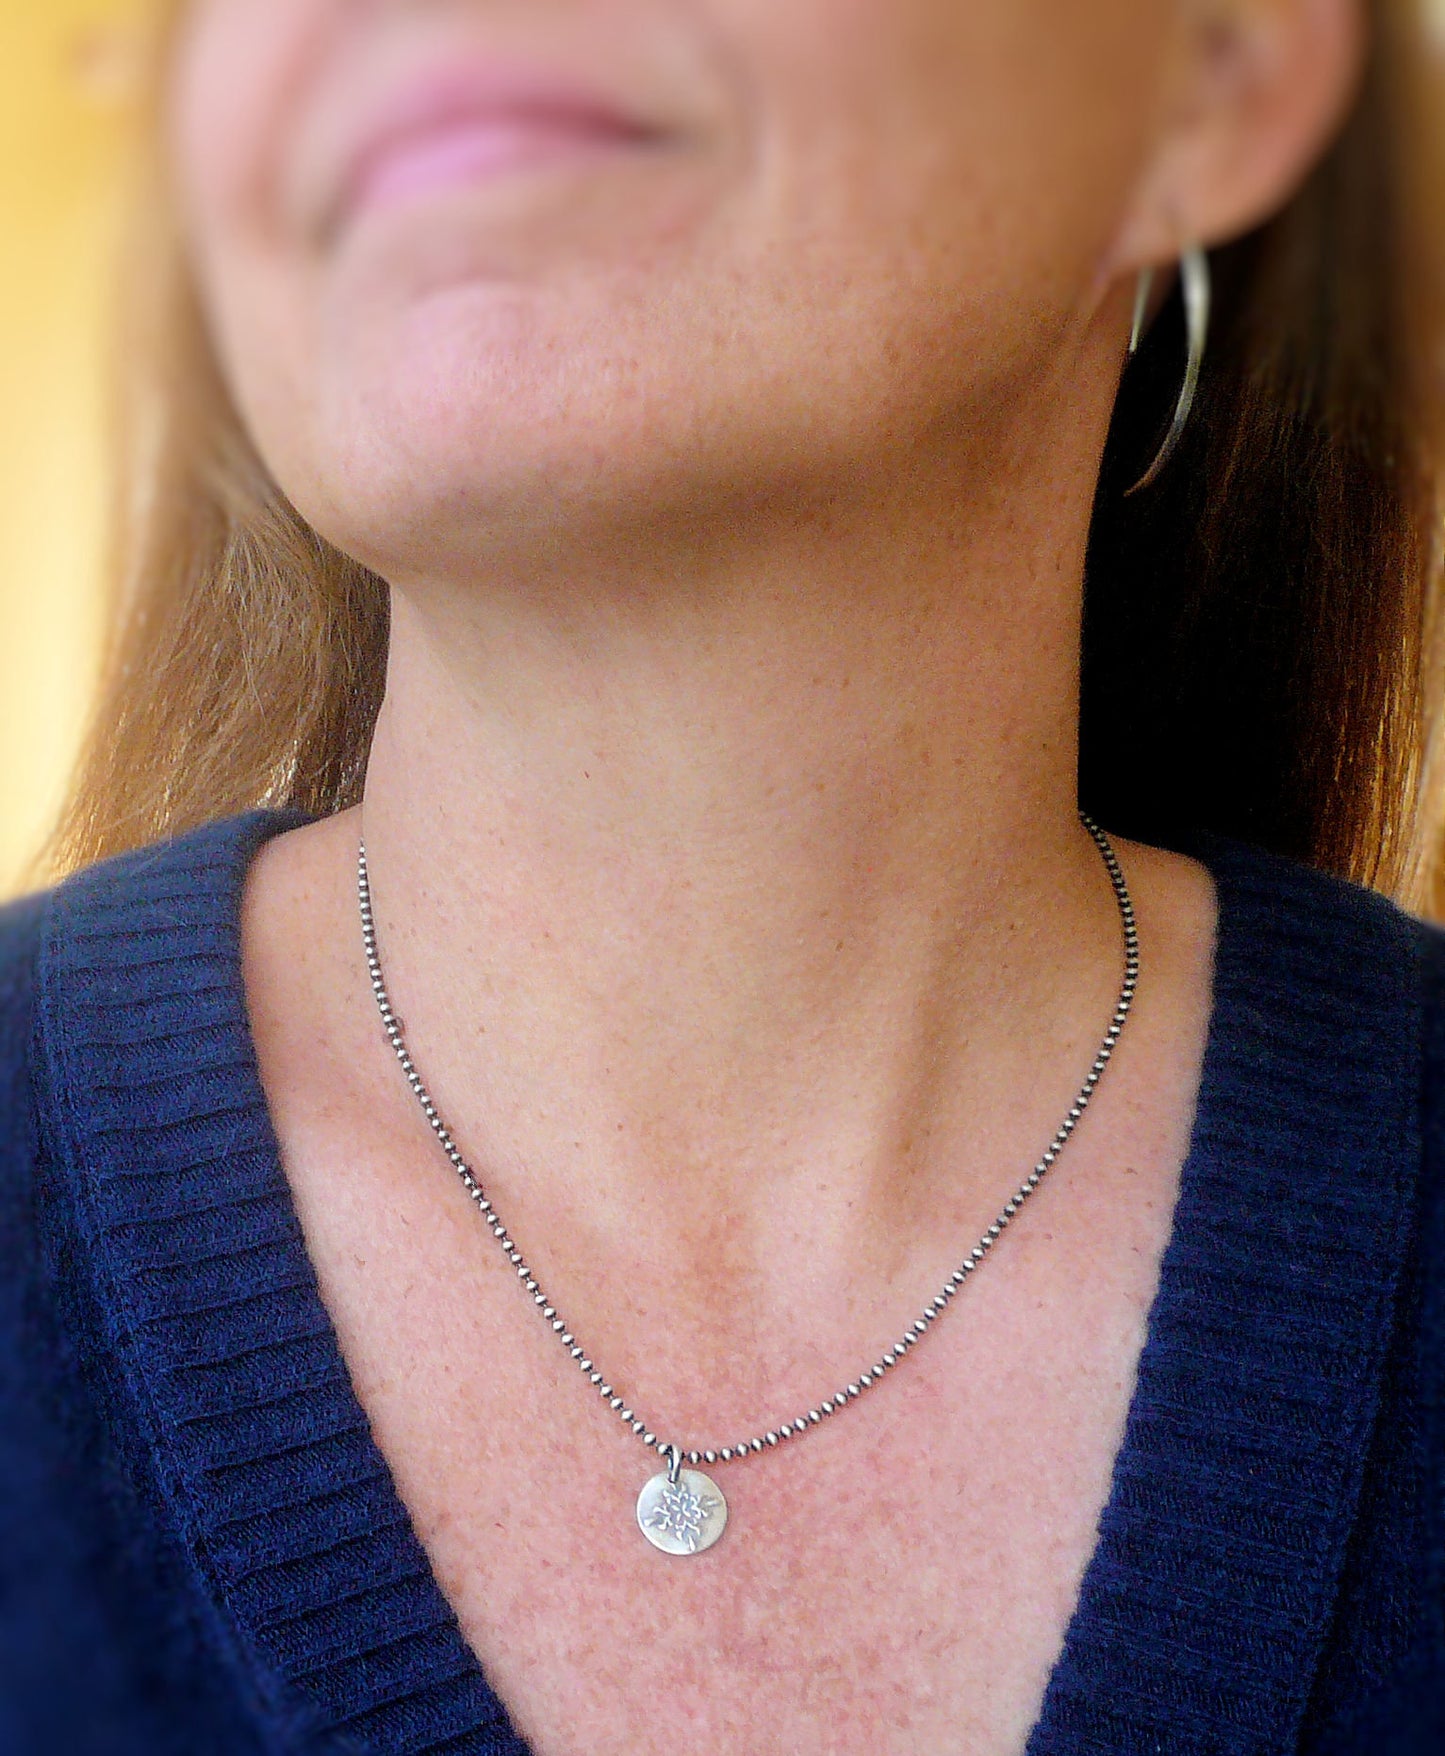 Medallion Medium Style I Necklace  - Oxidized fine and Sterling Silver. Handmade